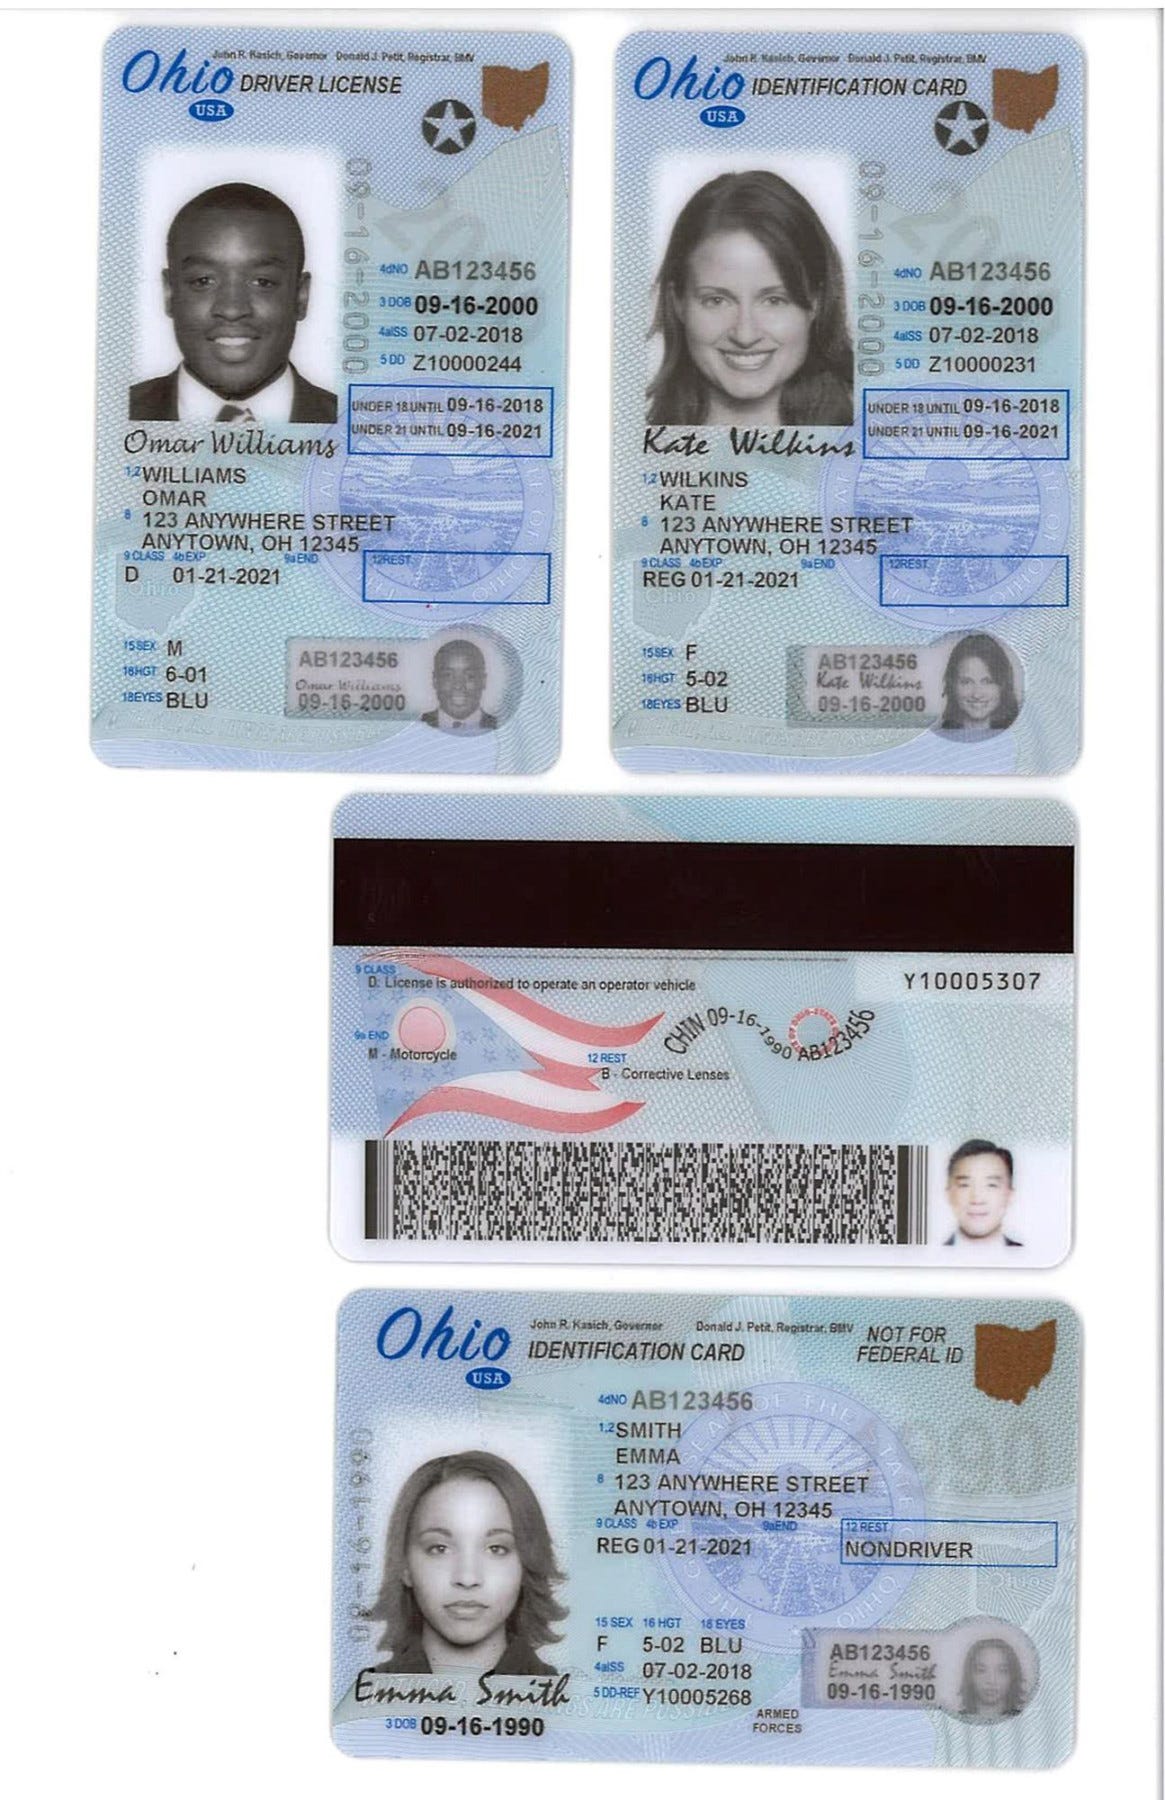 12 rest a on driver's license ohio